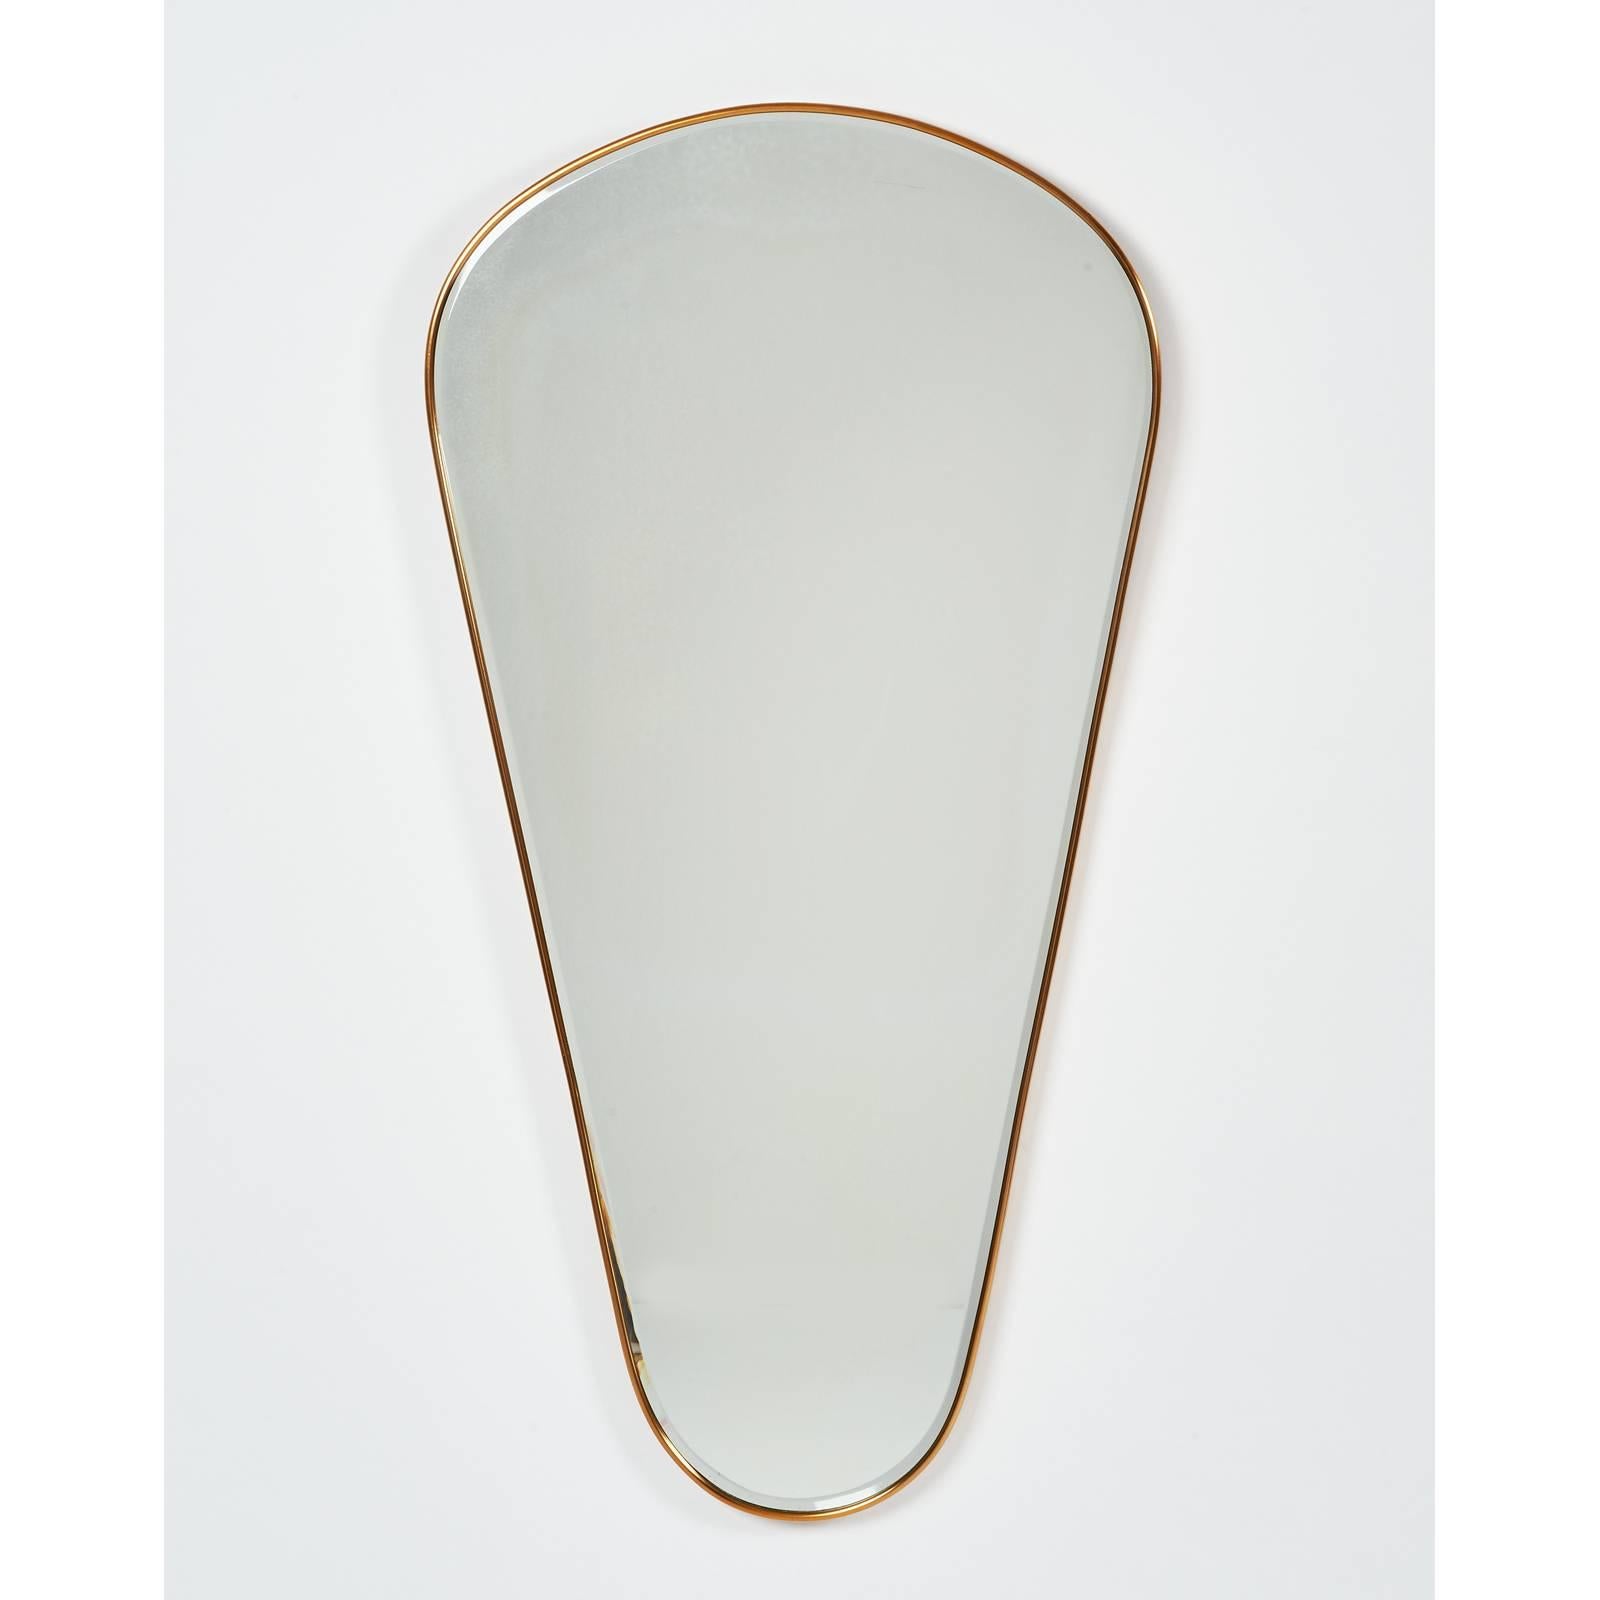 ITALY, 1950s.
Tear-drop mirror, Brass frame with beveled mirror.
20 x 40.
Can be hung in reverse : 40 x 20.
Aging to silvering on the mirror